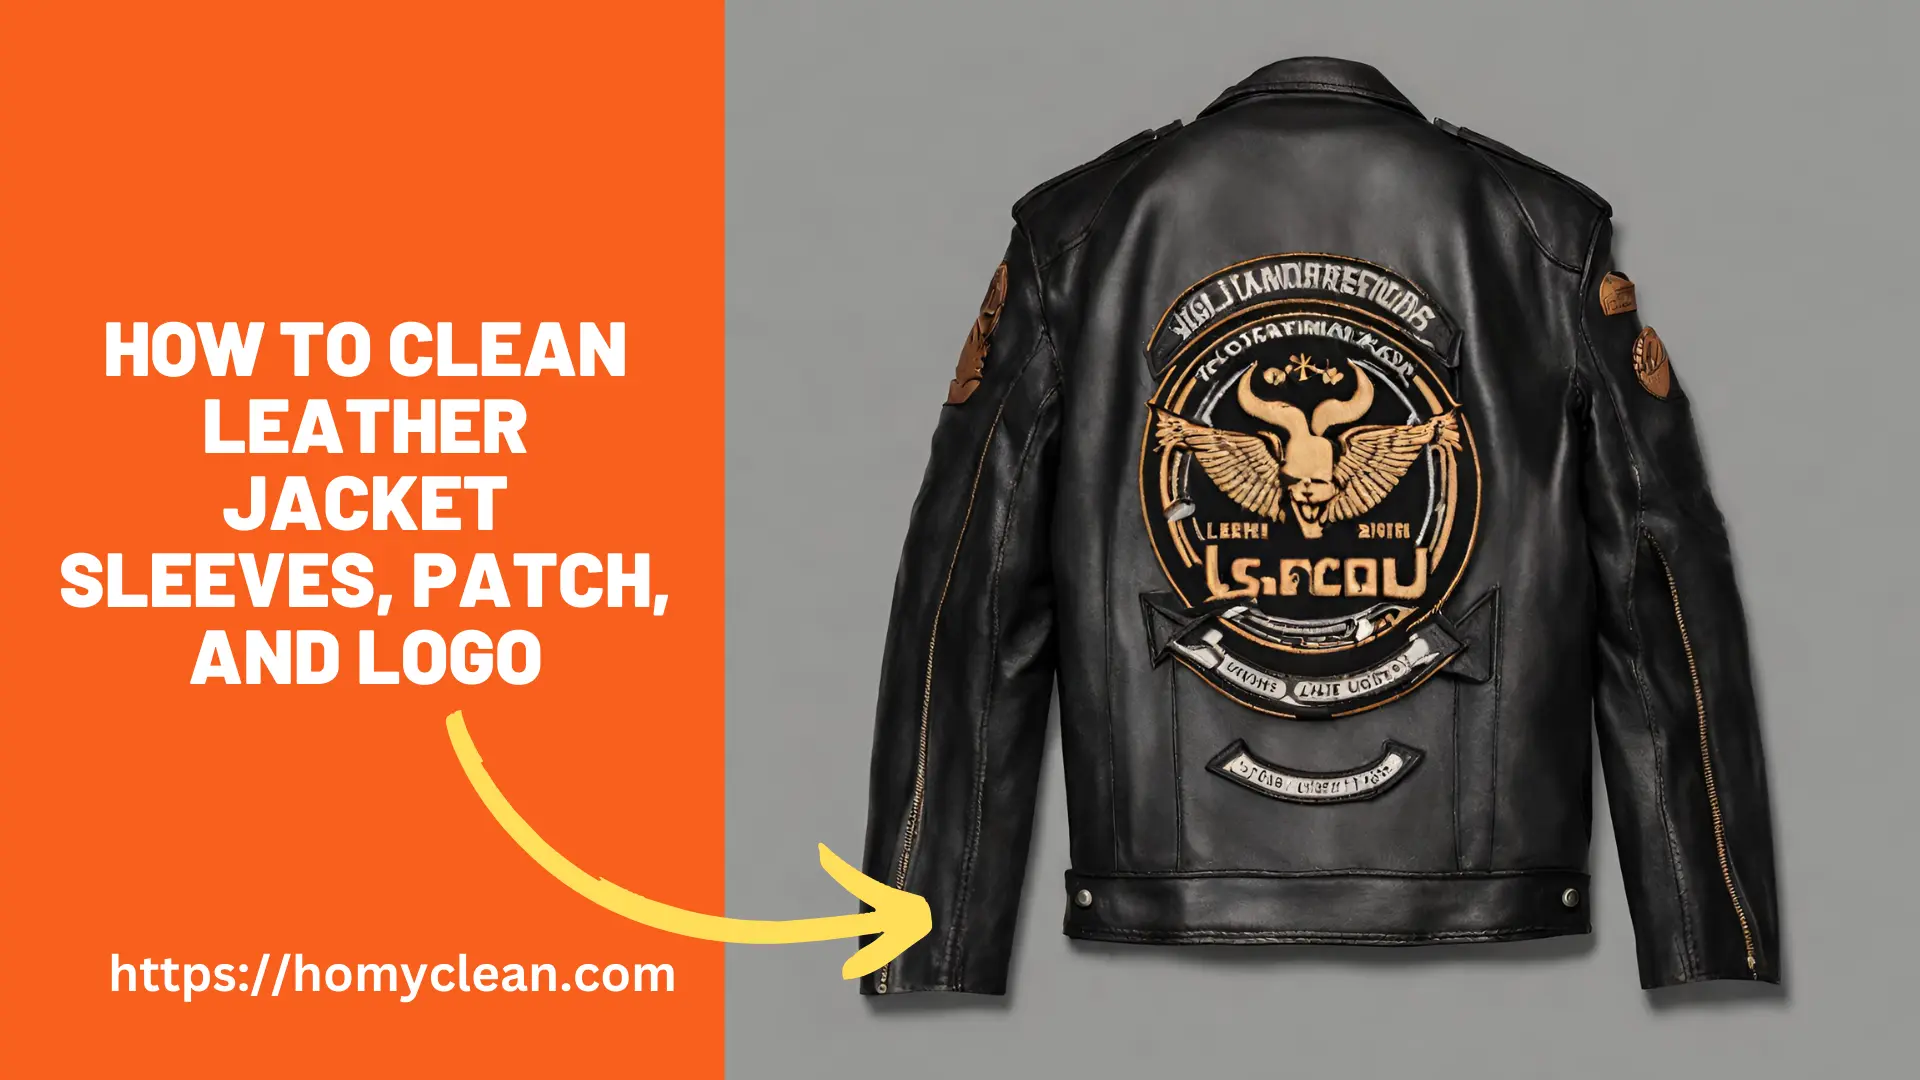 How to Clean Leather Jacket Sleeves, Patch, and Logo